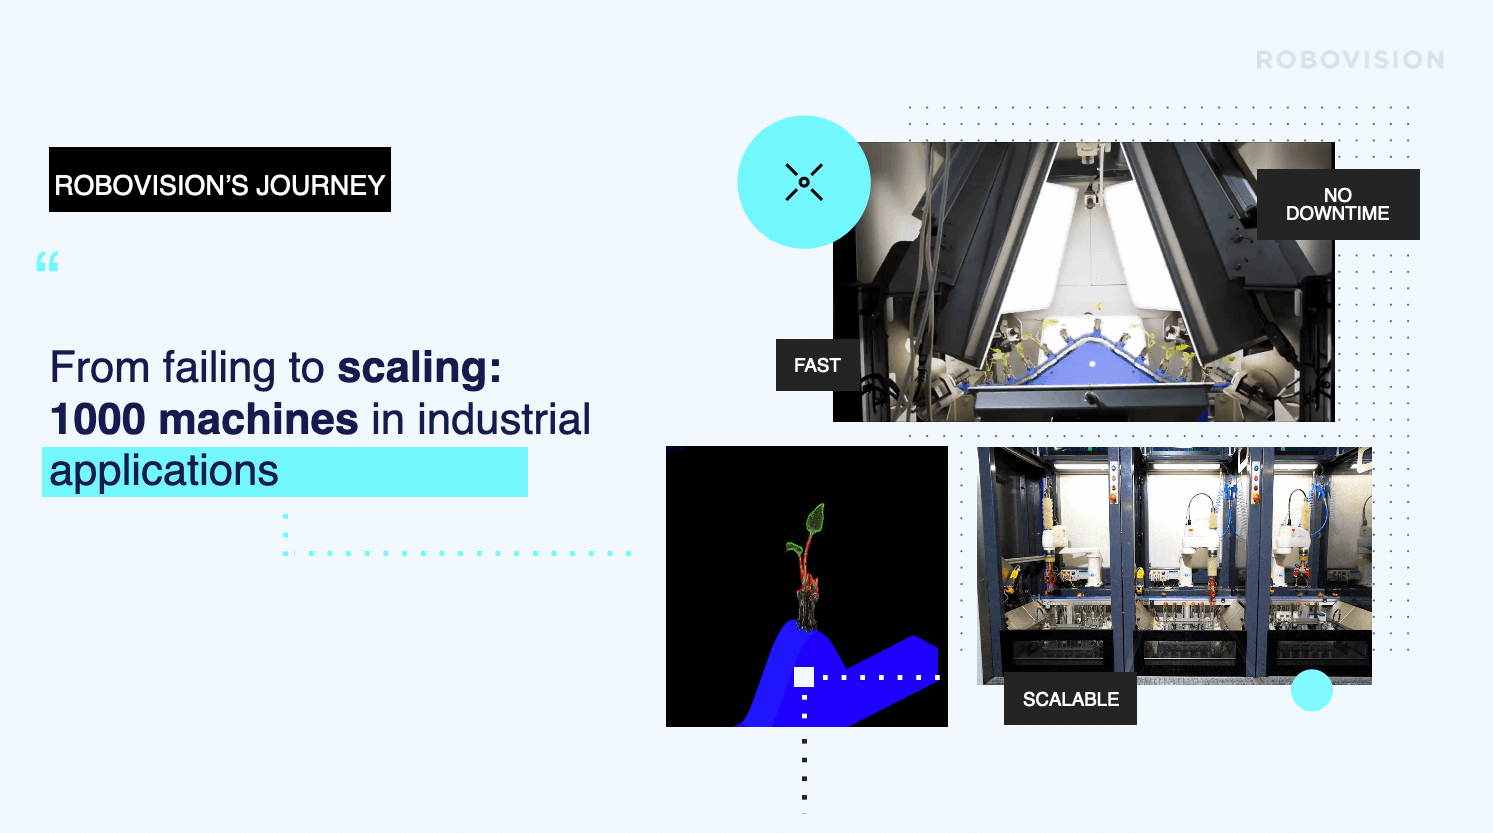 ROBOVISION’S JOURNEY From failing to scaling:1000 machines in industrial applications